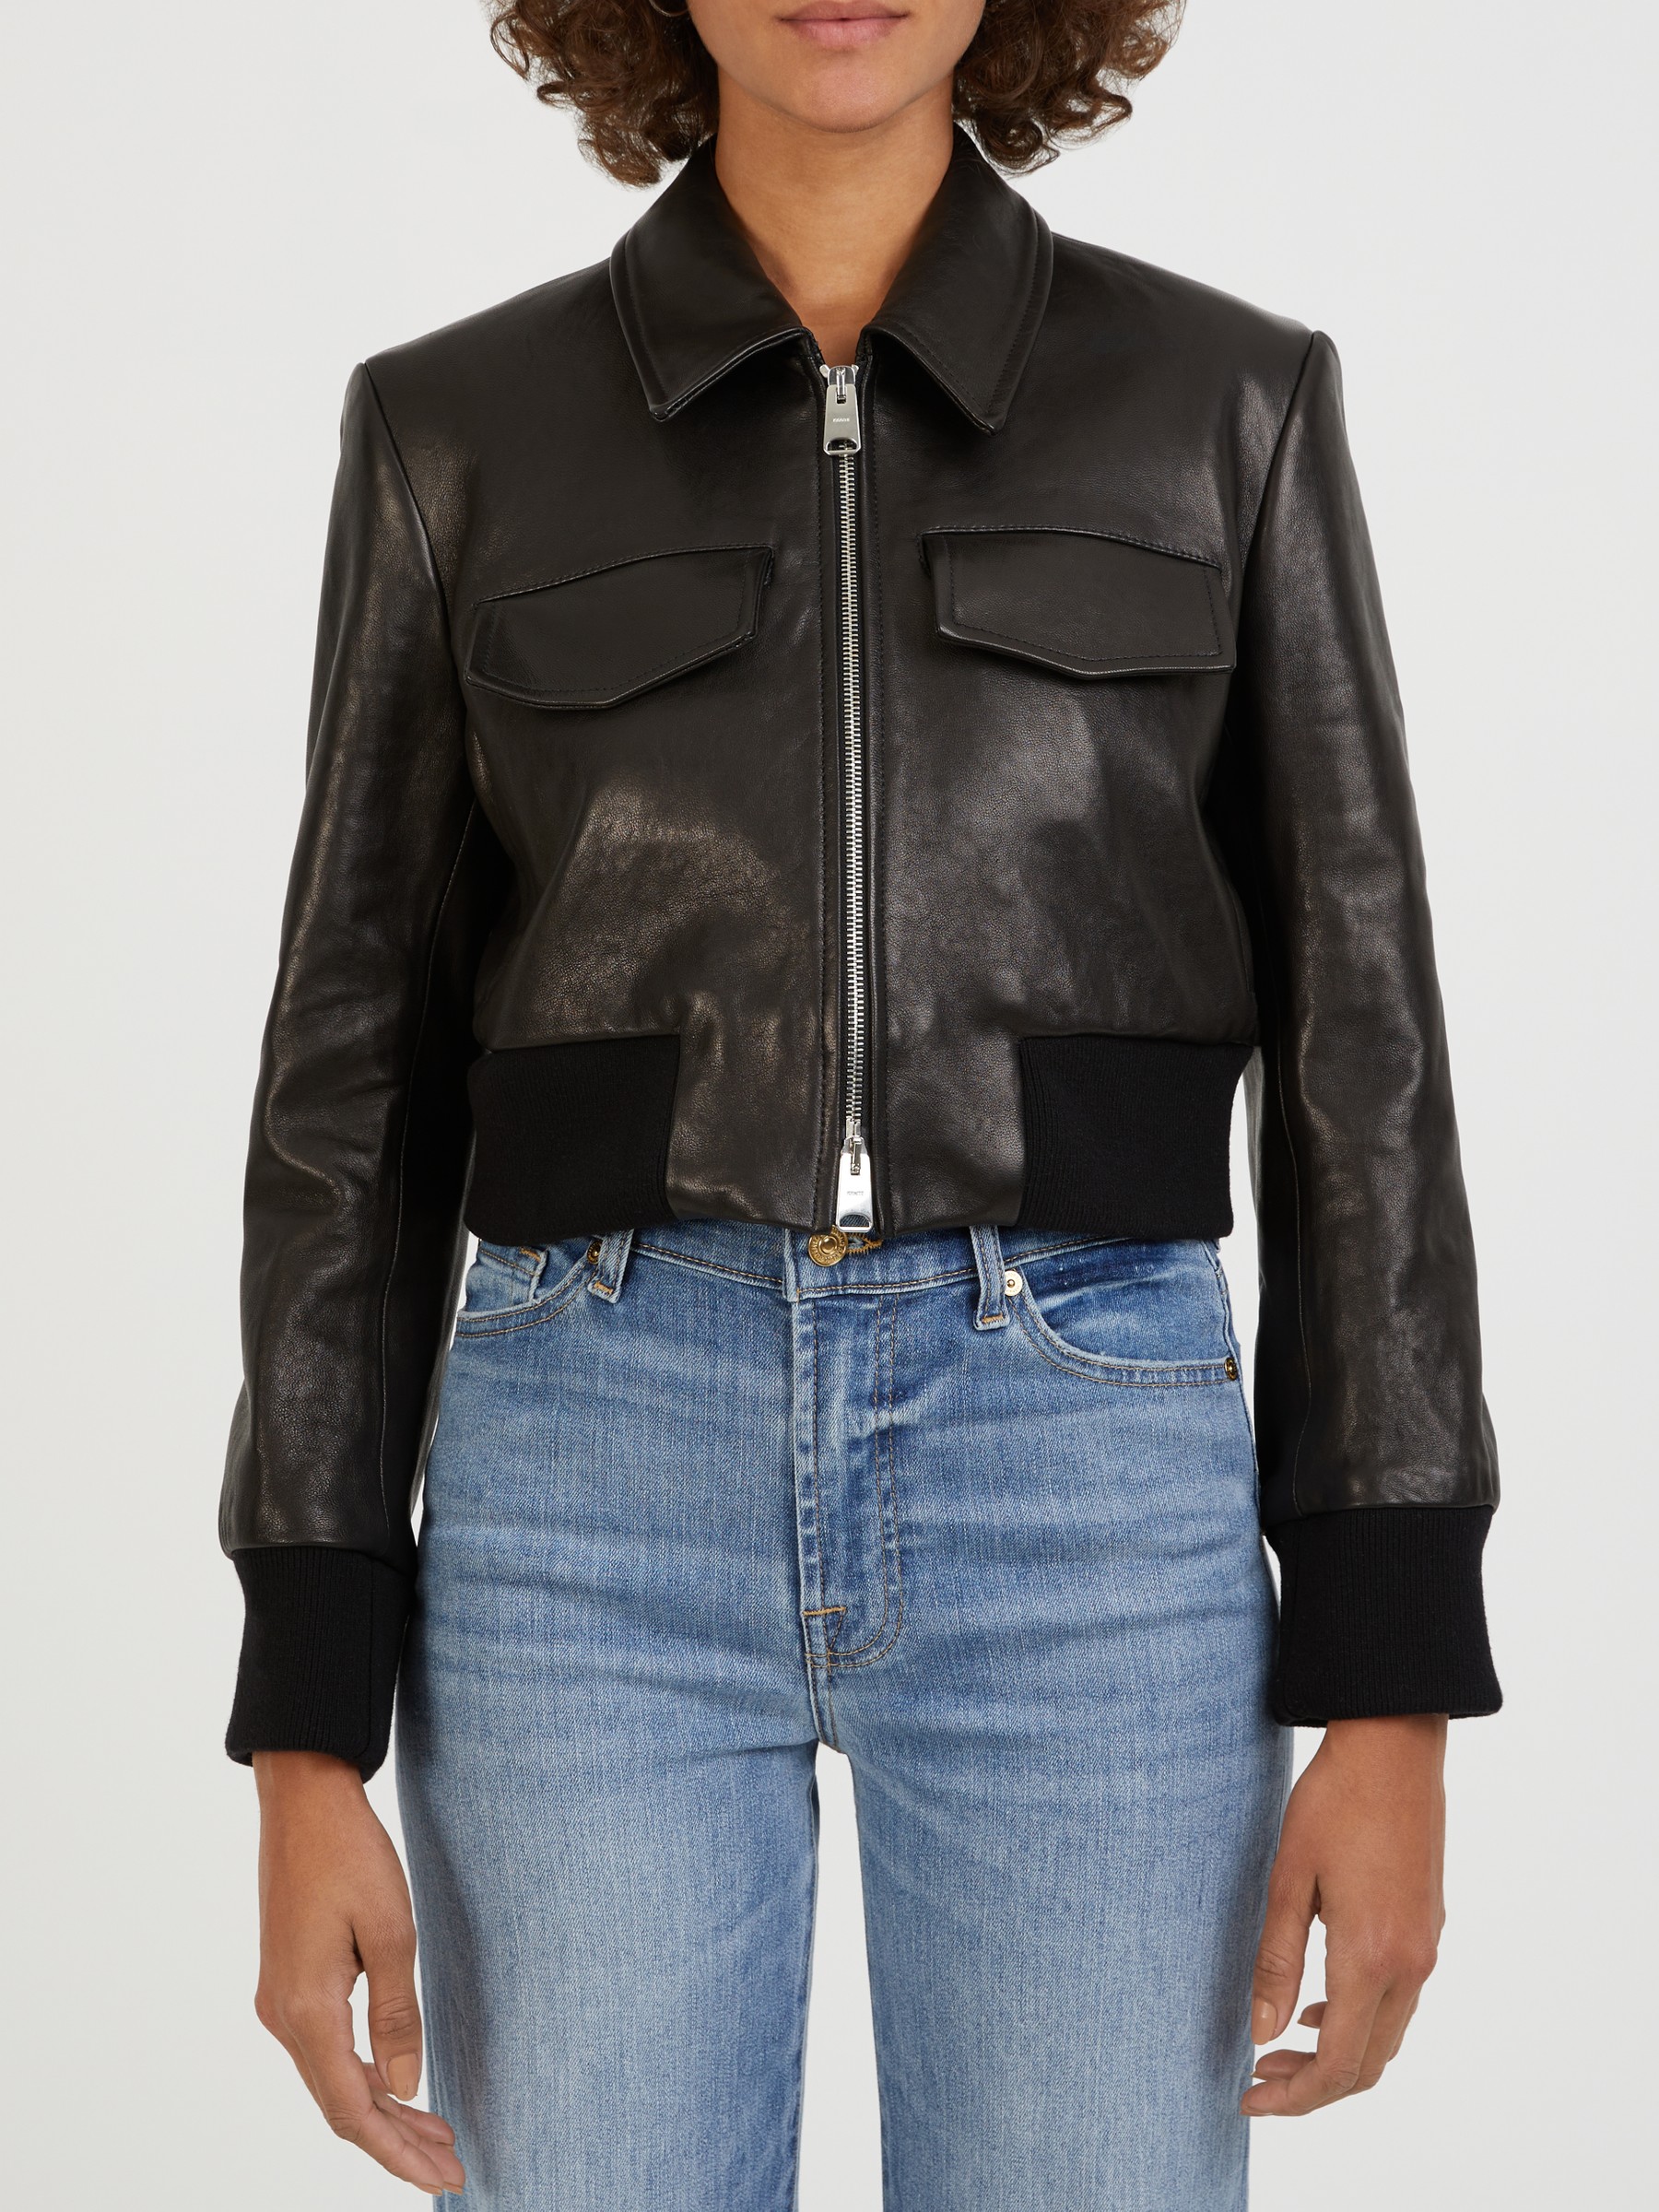 Khaite Women's Hector Brown Embossed Leather Jacket | L by Mitchell Stores